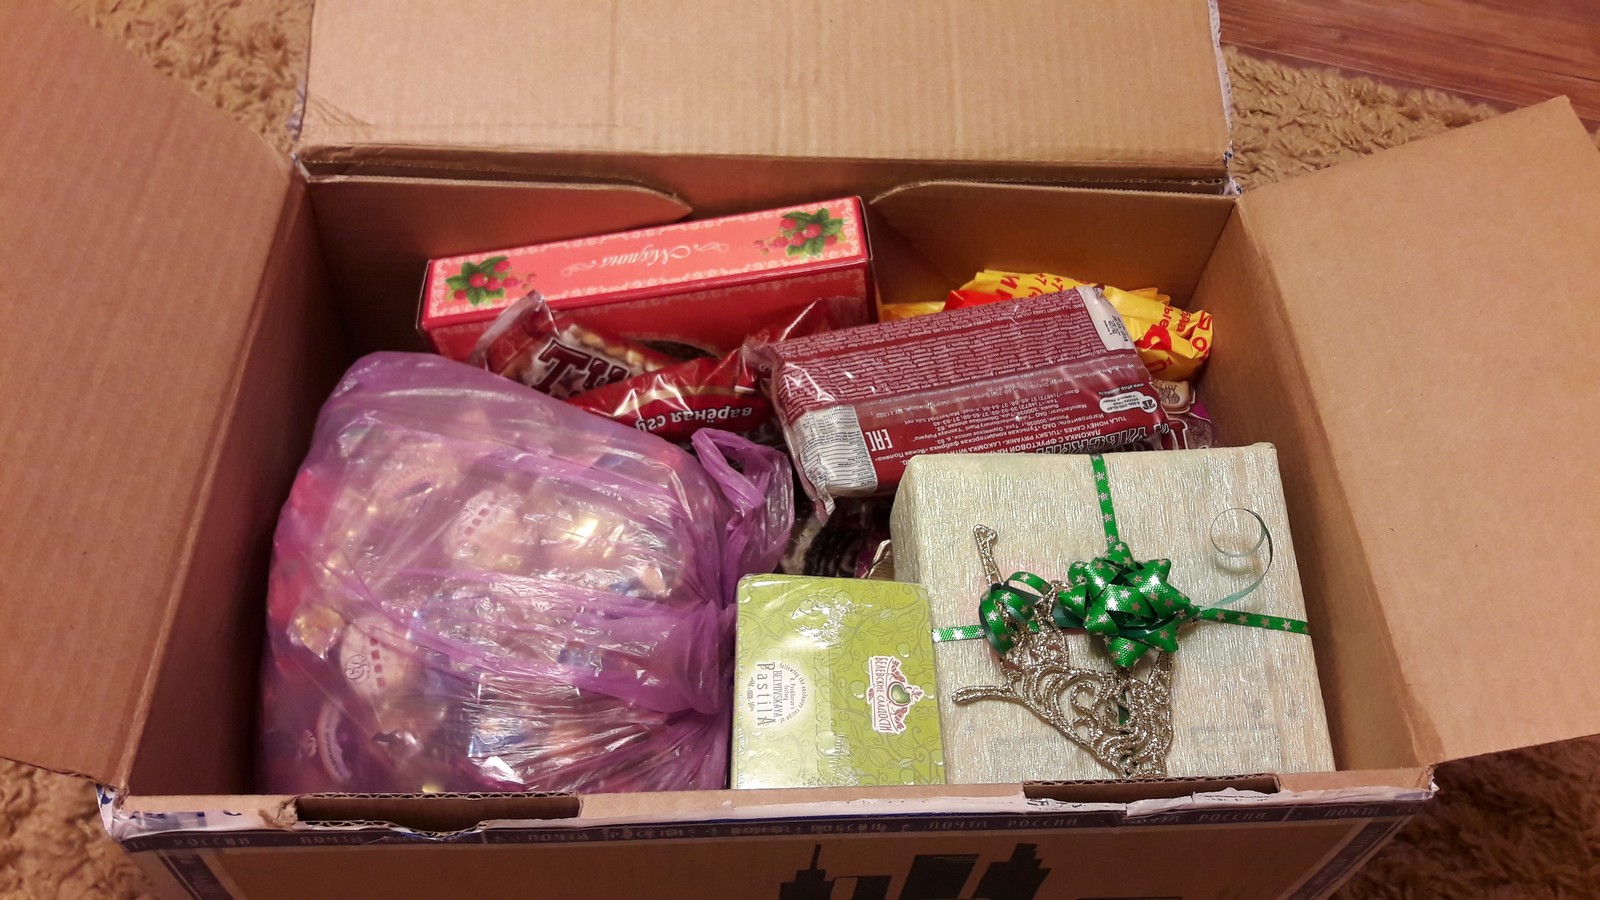 From Tula to Surgut, faith in Santa Claus has been restored! - Presents, Father Frost, Altruism, New Year's gift exchange, Longpost, Secret Santa, 